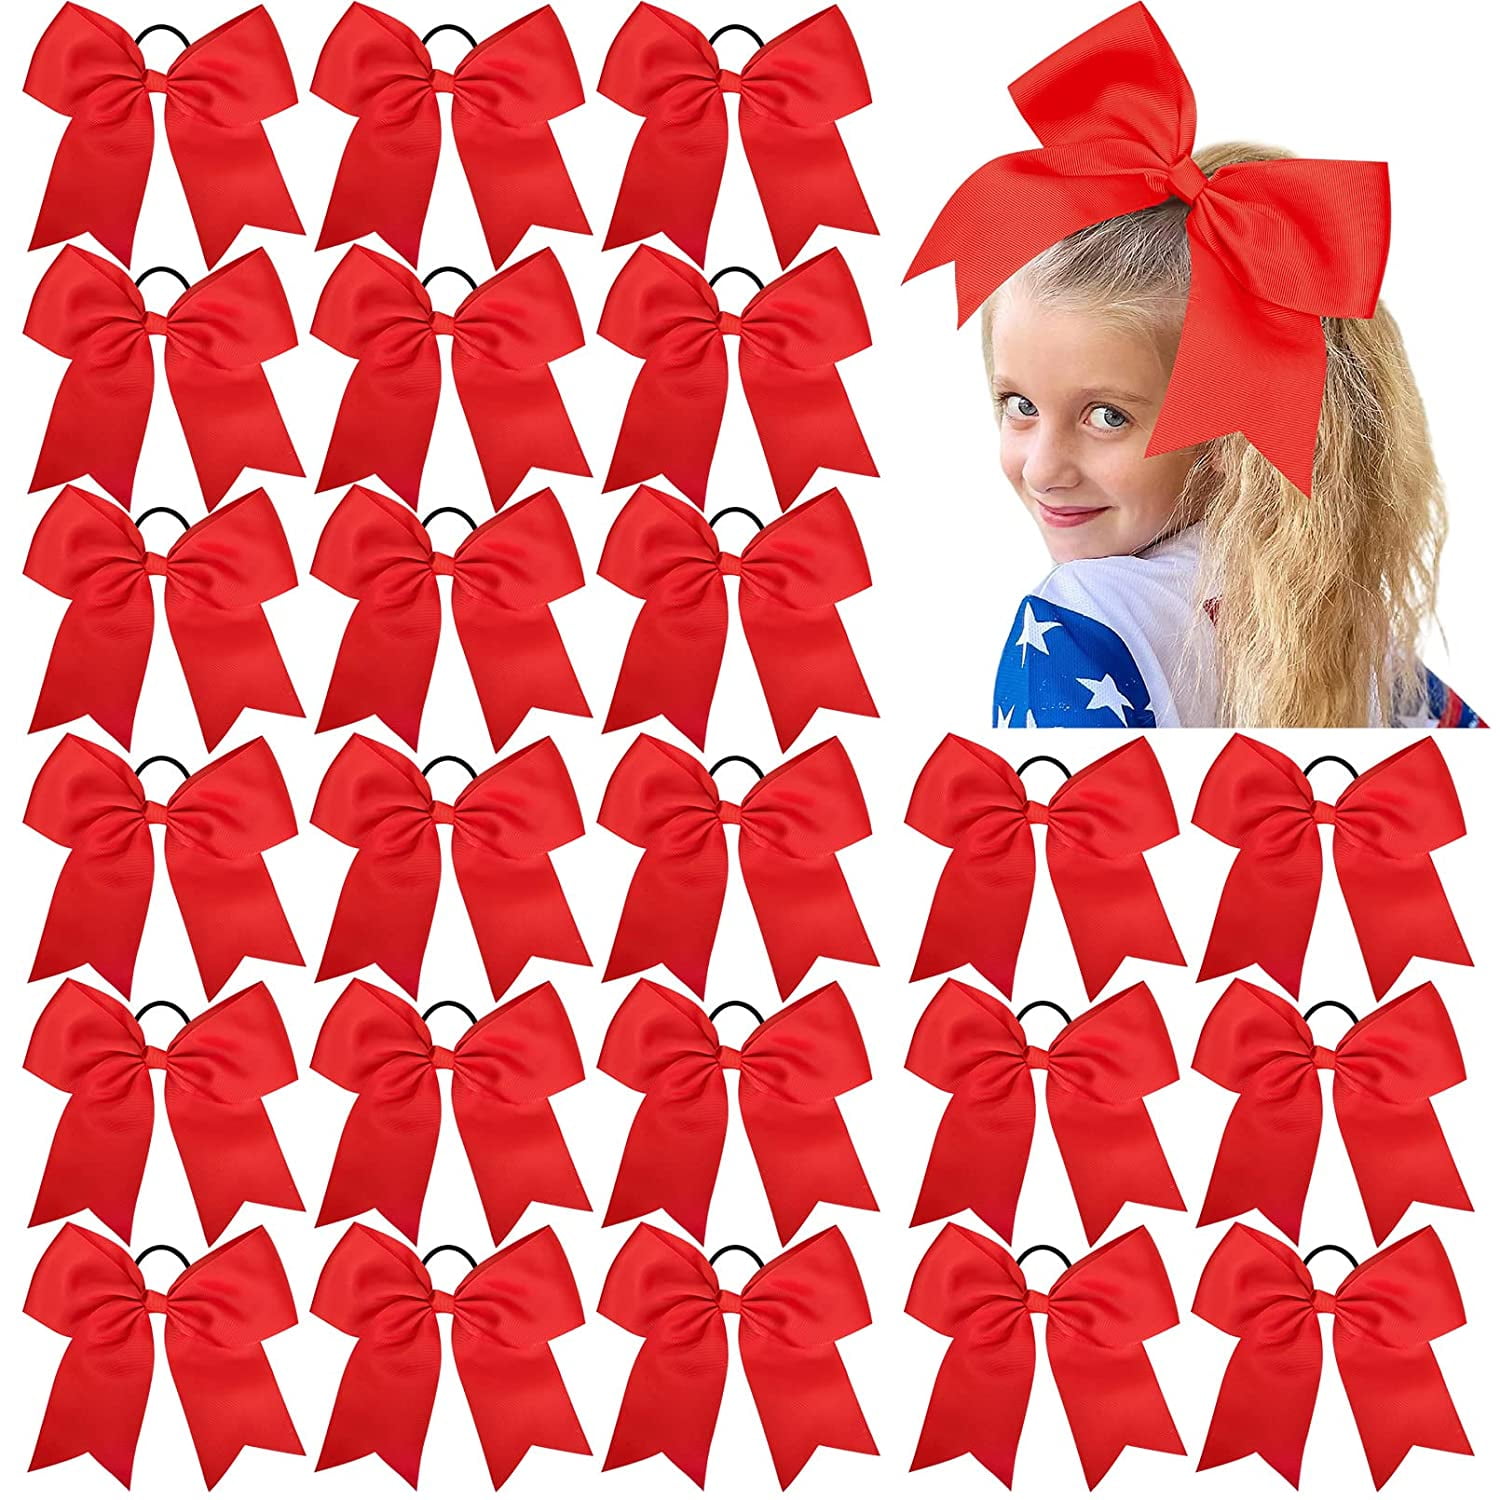 Red Cheer Bow, Red White Blue Cheer Ponytail Bow, Softball Team Bow –  Accessories by Me, LLC